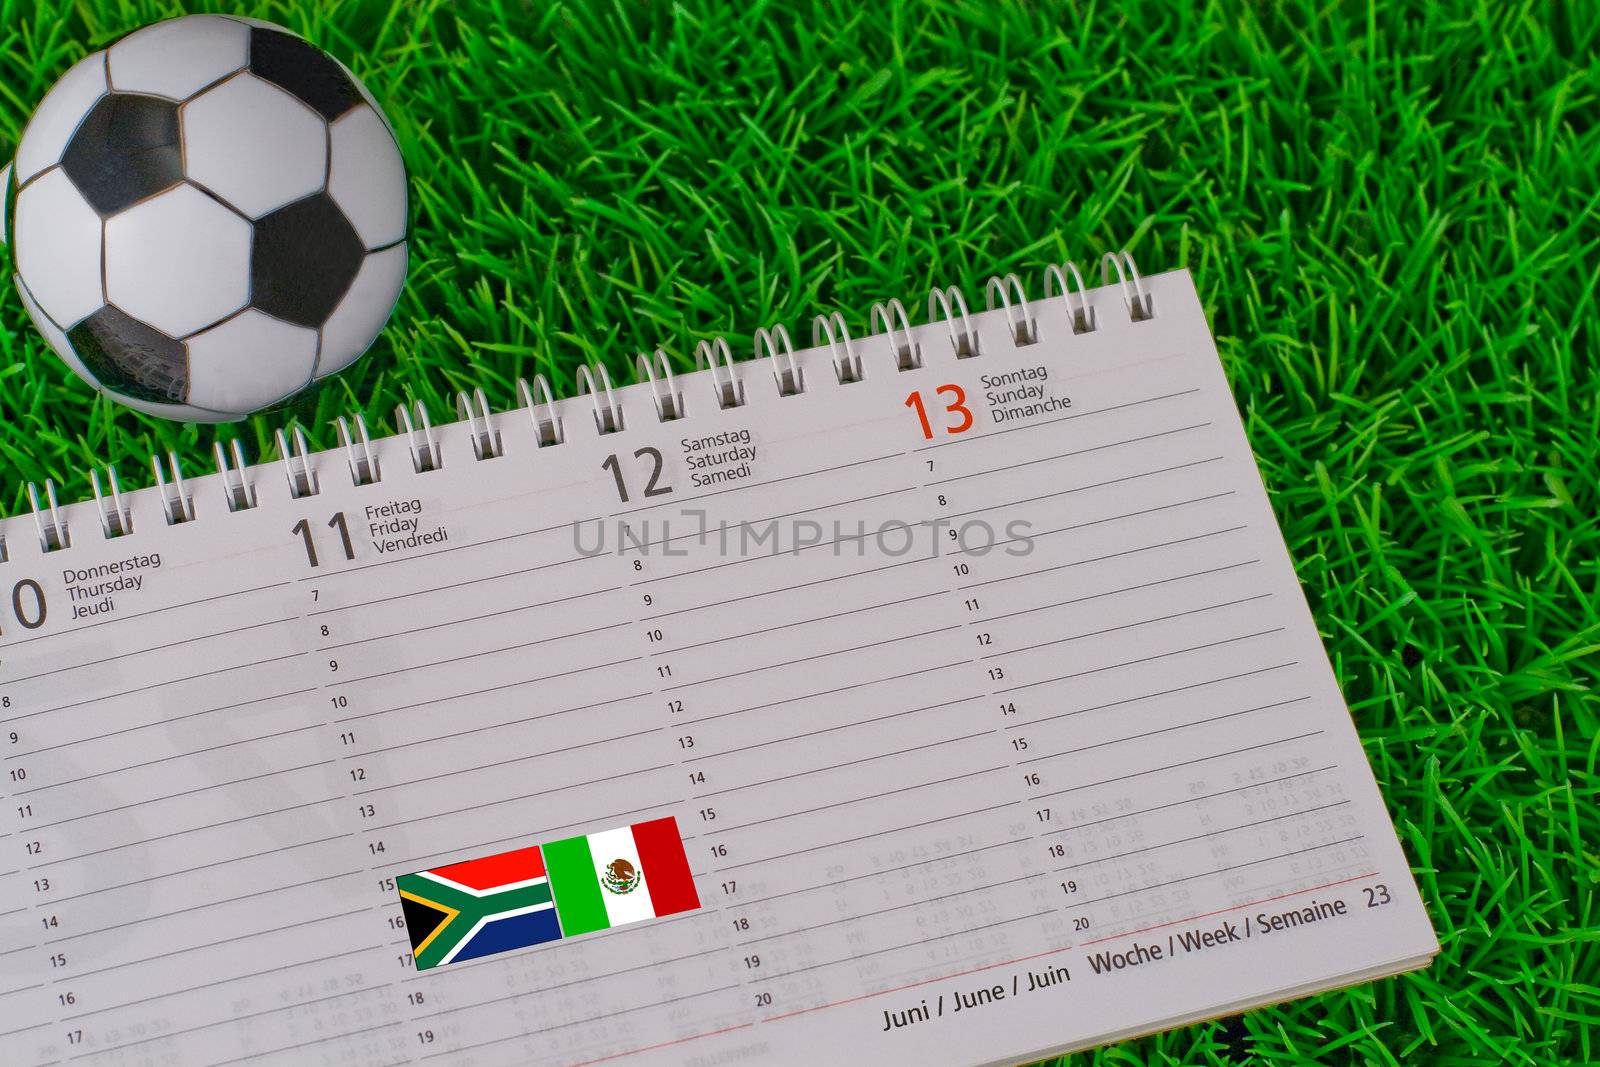 Calendar date 11. Juni 2010 with flags of Mexico and South Africa (opening game World Cup South Africa 2010)